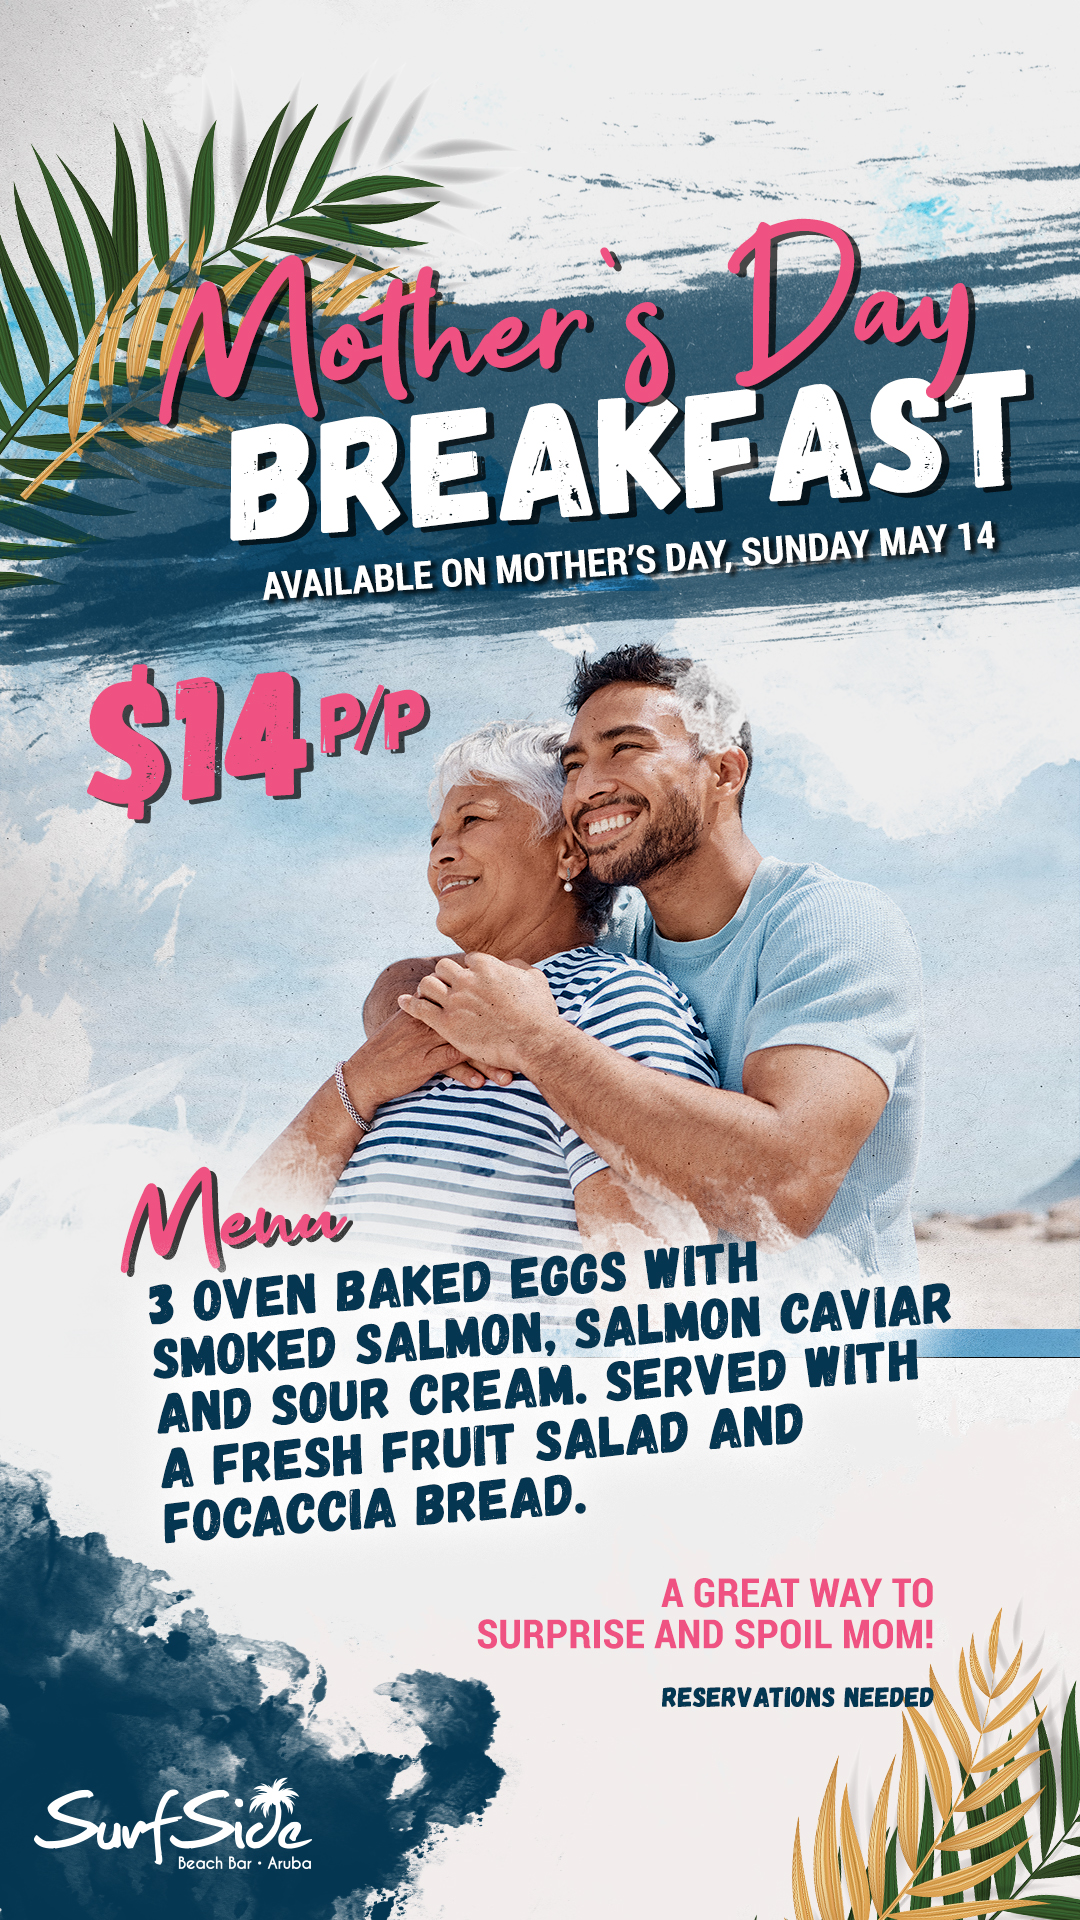 Mother's Day breakfast Surfside Beach Bar Sunday, May 14th $14 per person